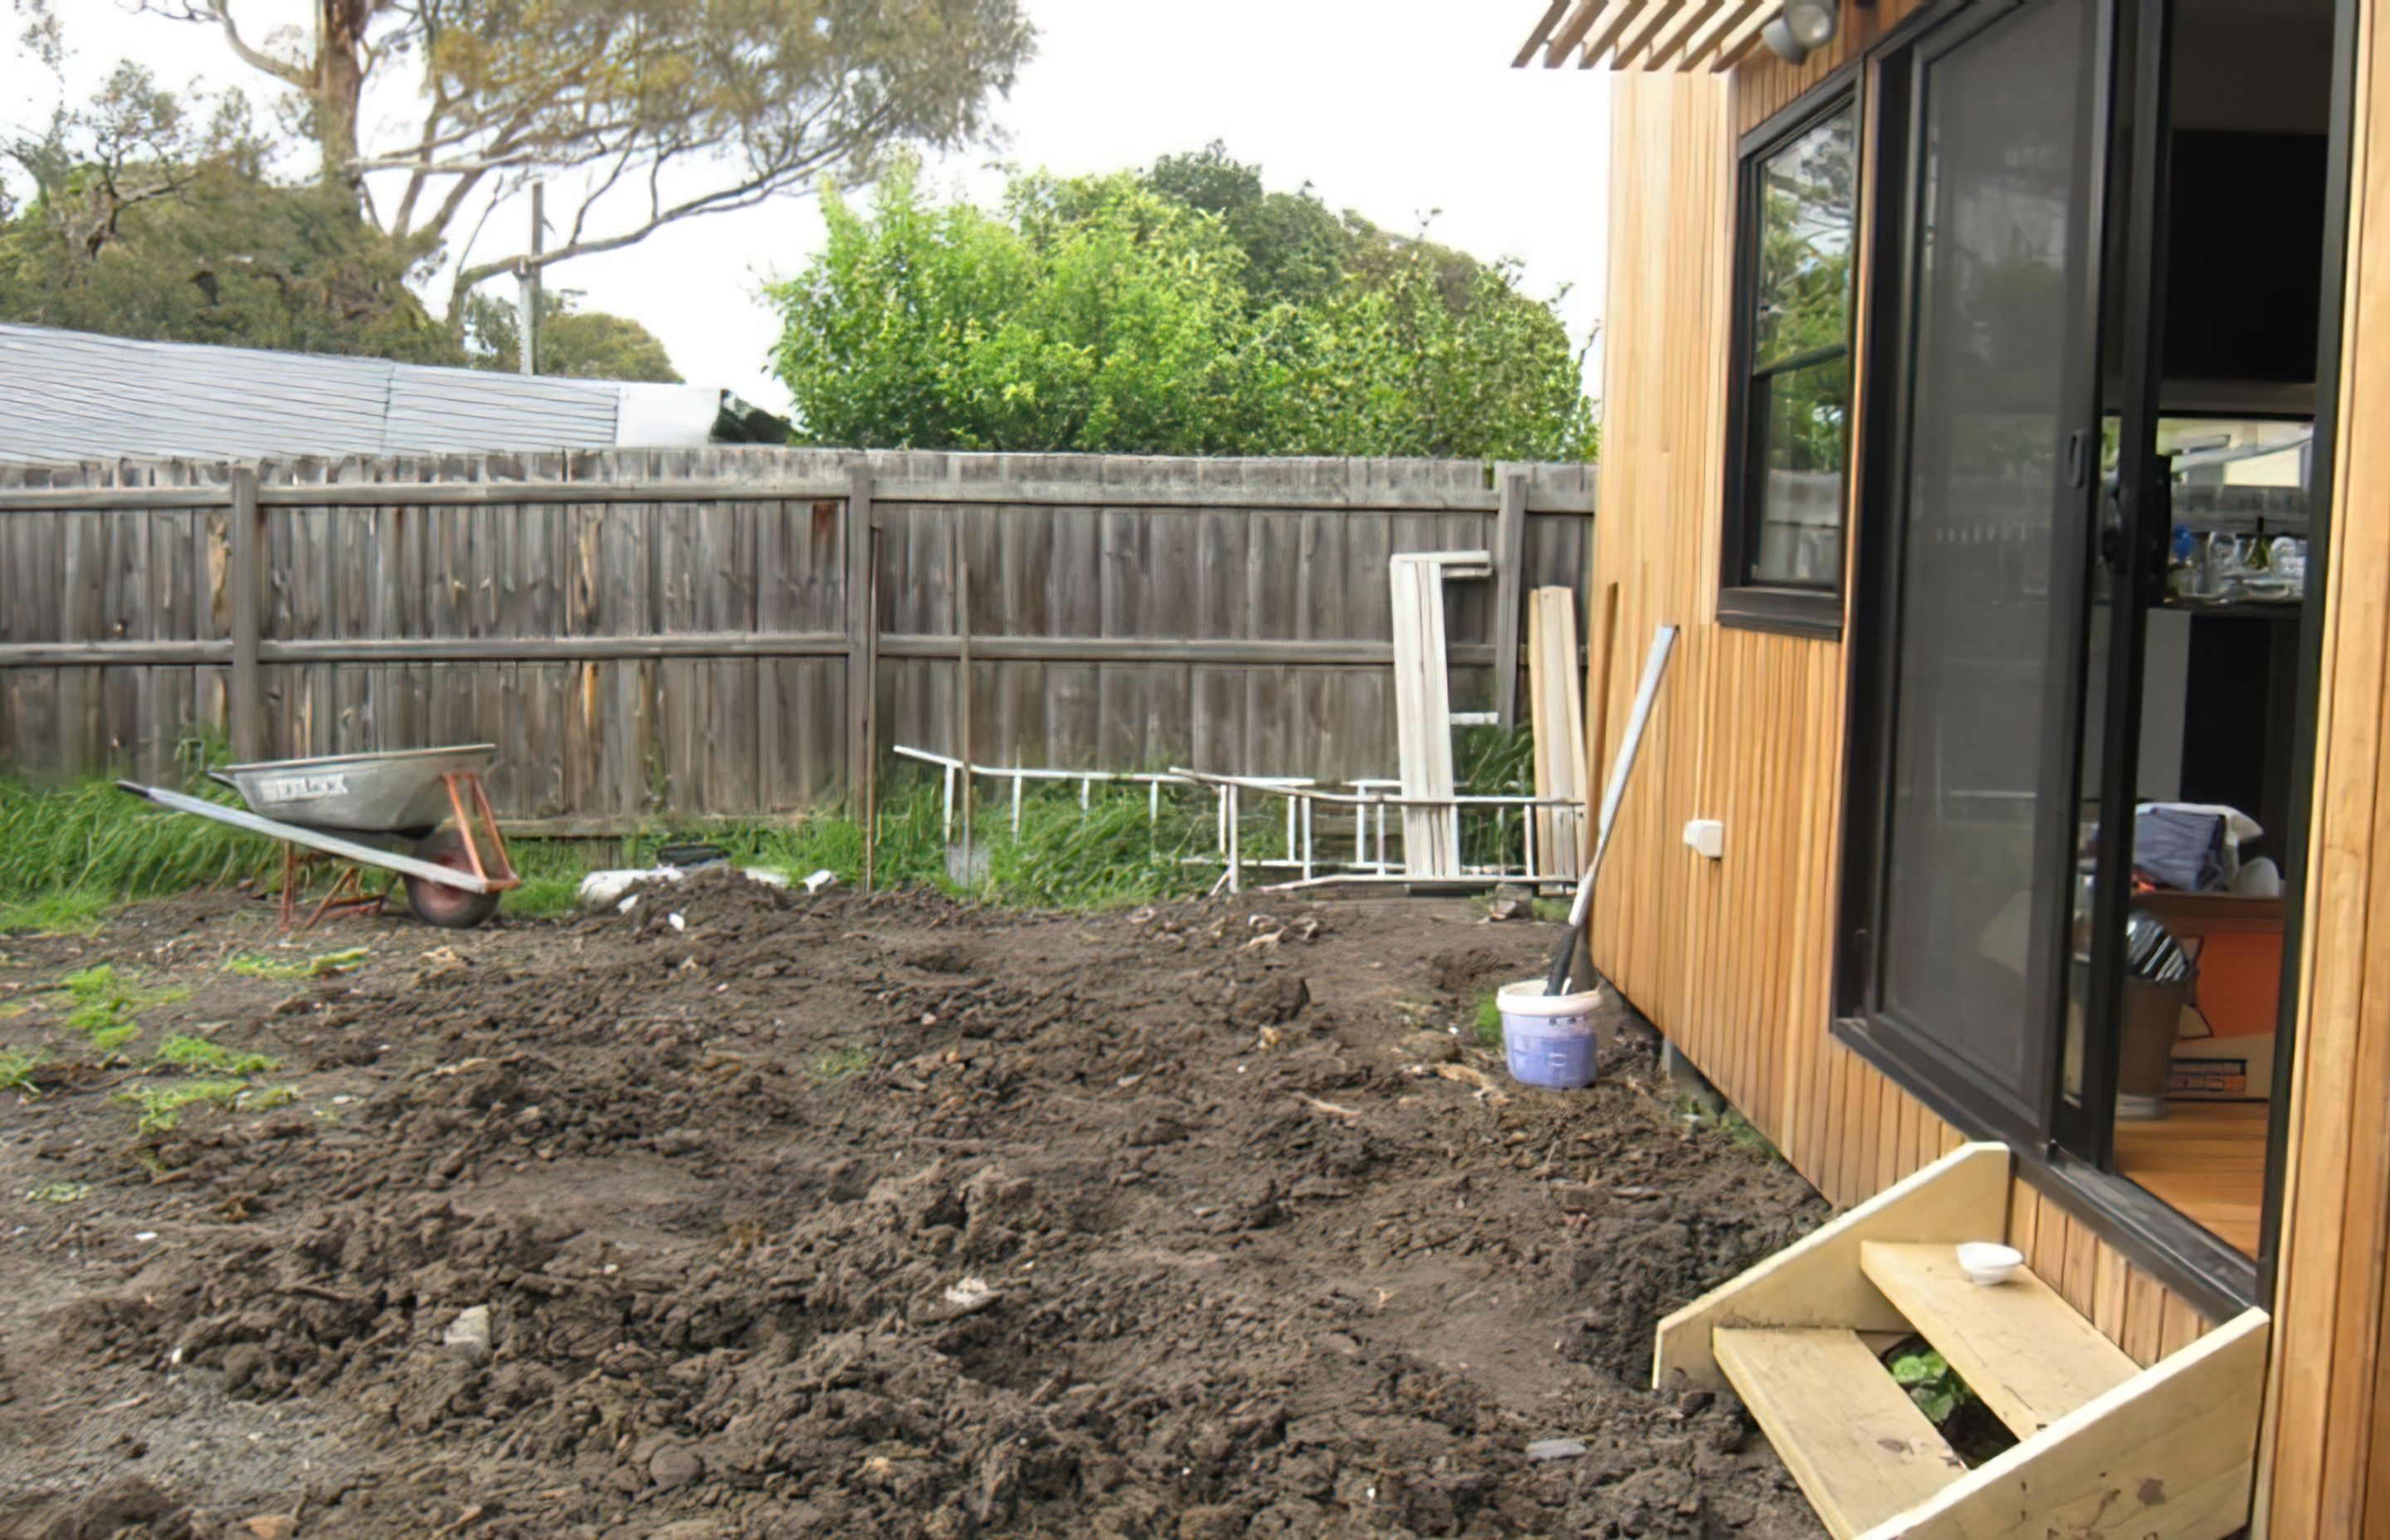 BEFORE the garden design. The backyard is a mess after renovations